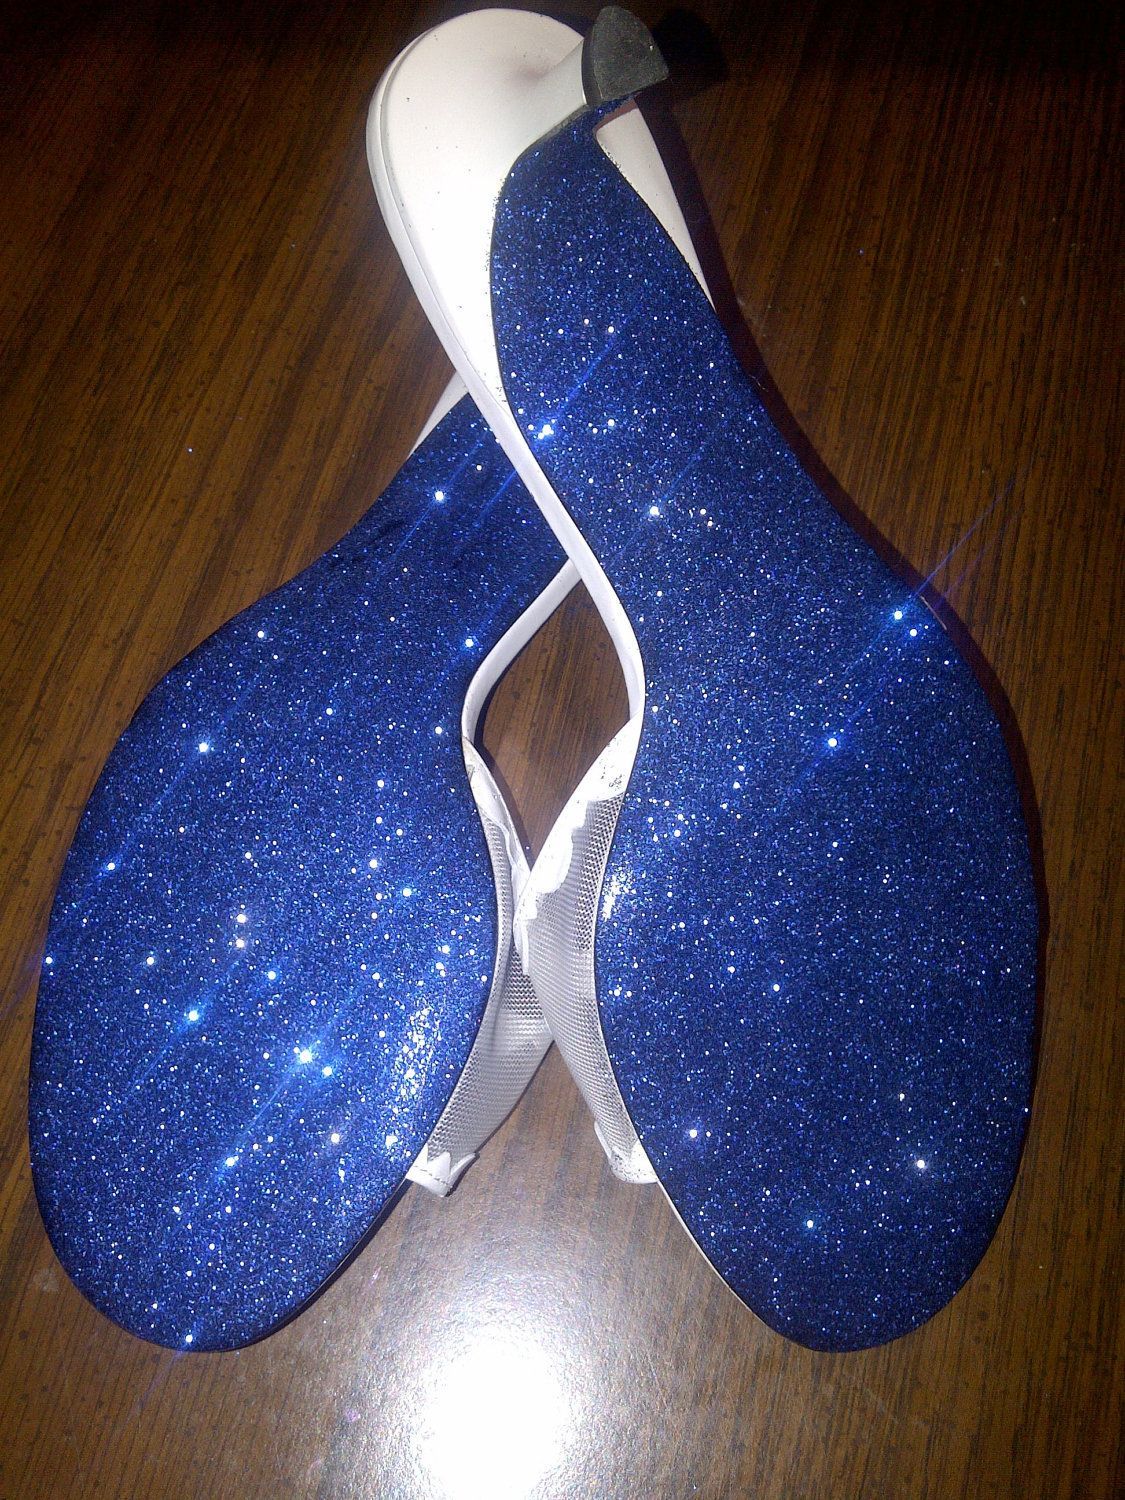 Glitter soles for your wedding shoes includes sixpence. $25.00, via Etsy.